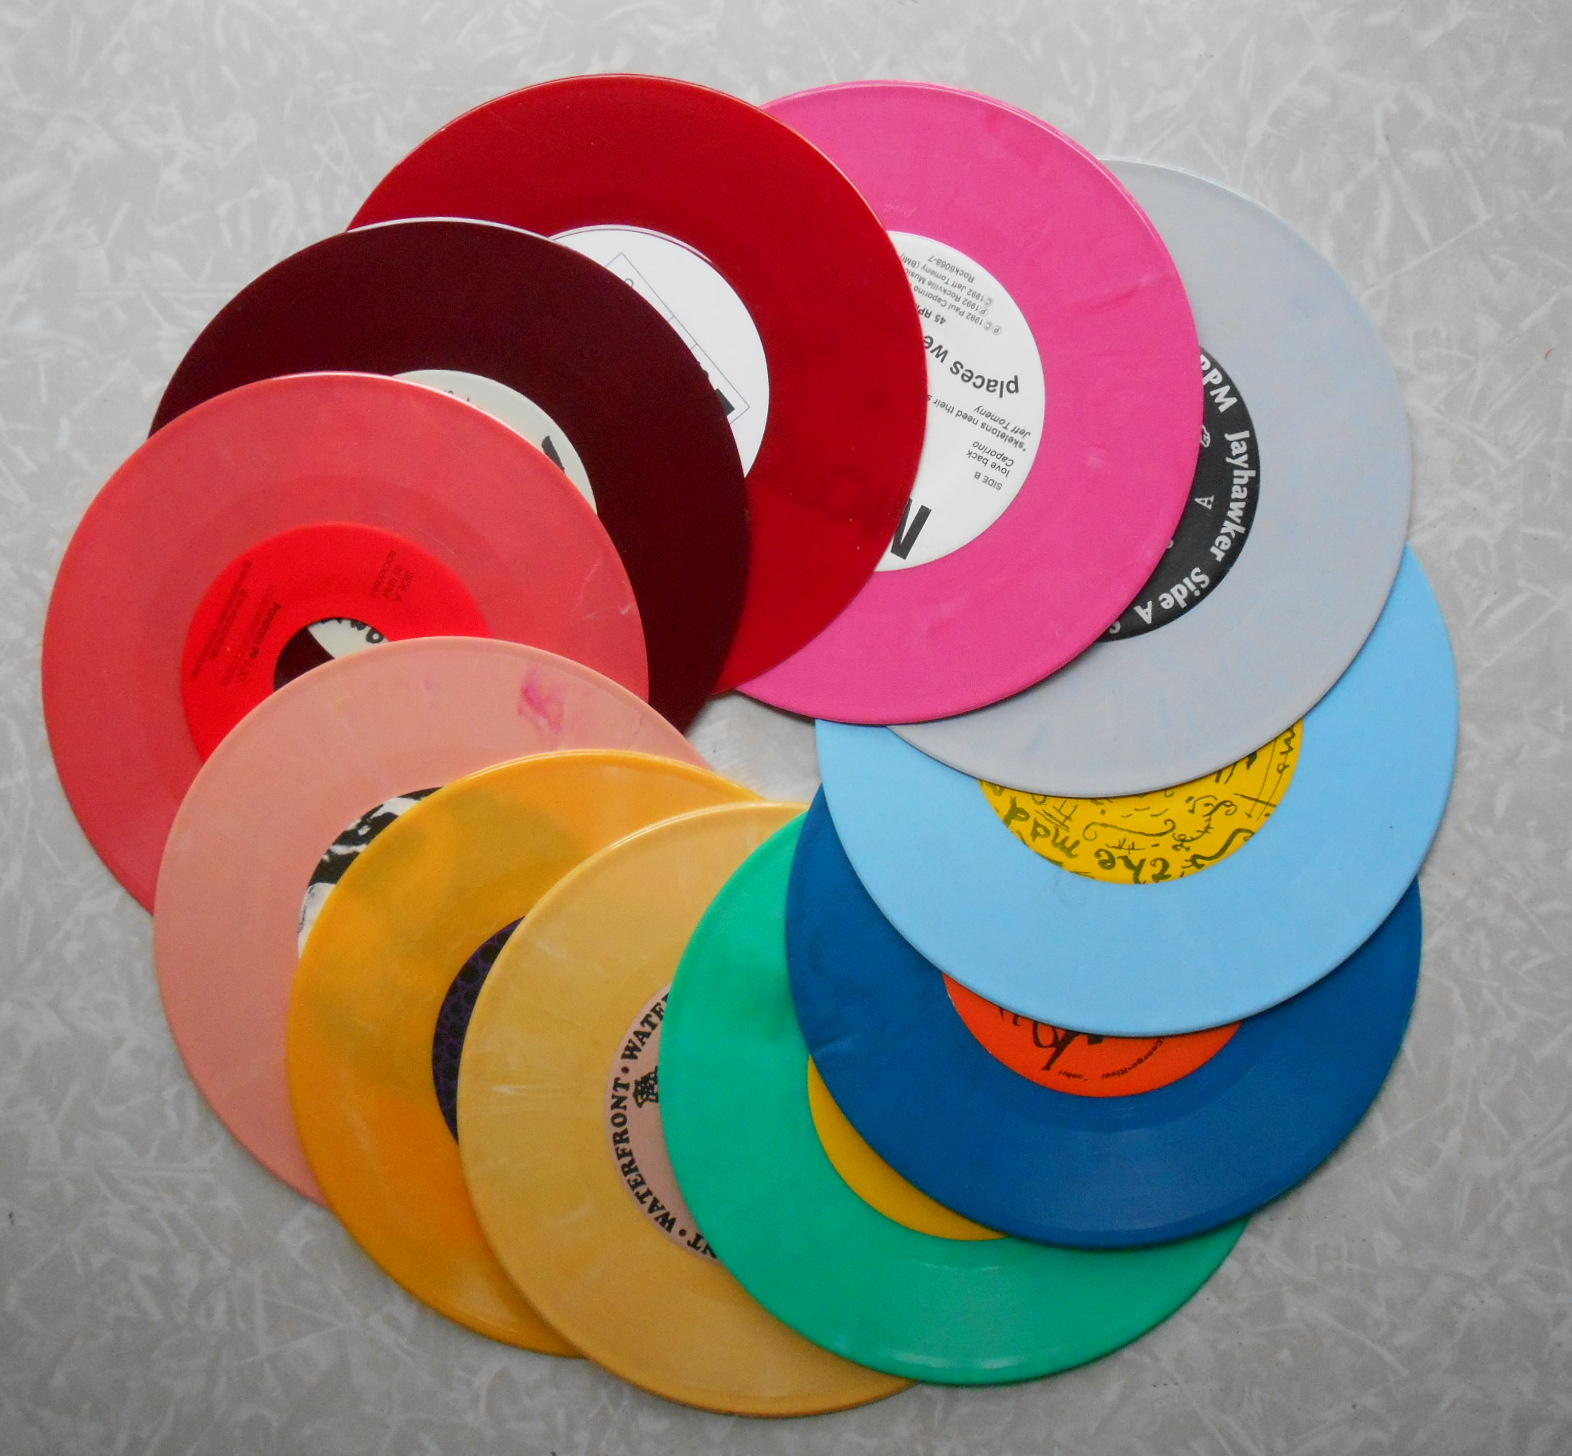 We’re live with a great selection of colored records and more!